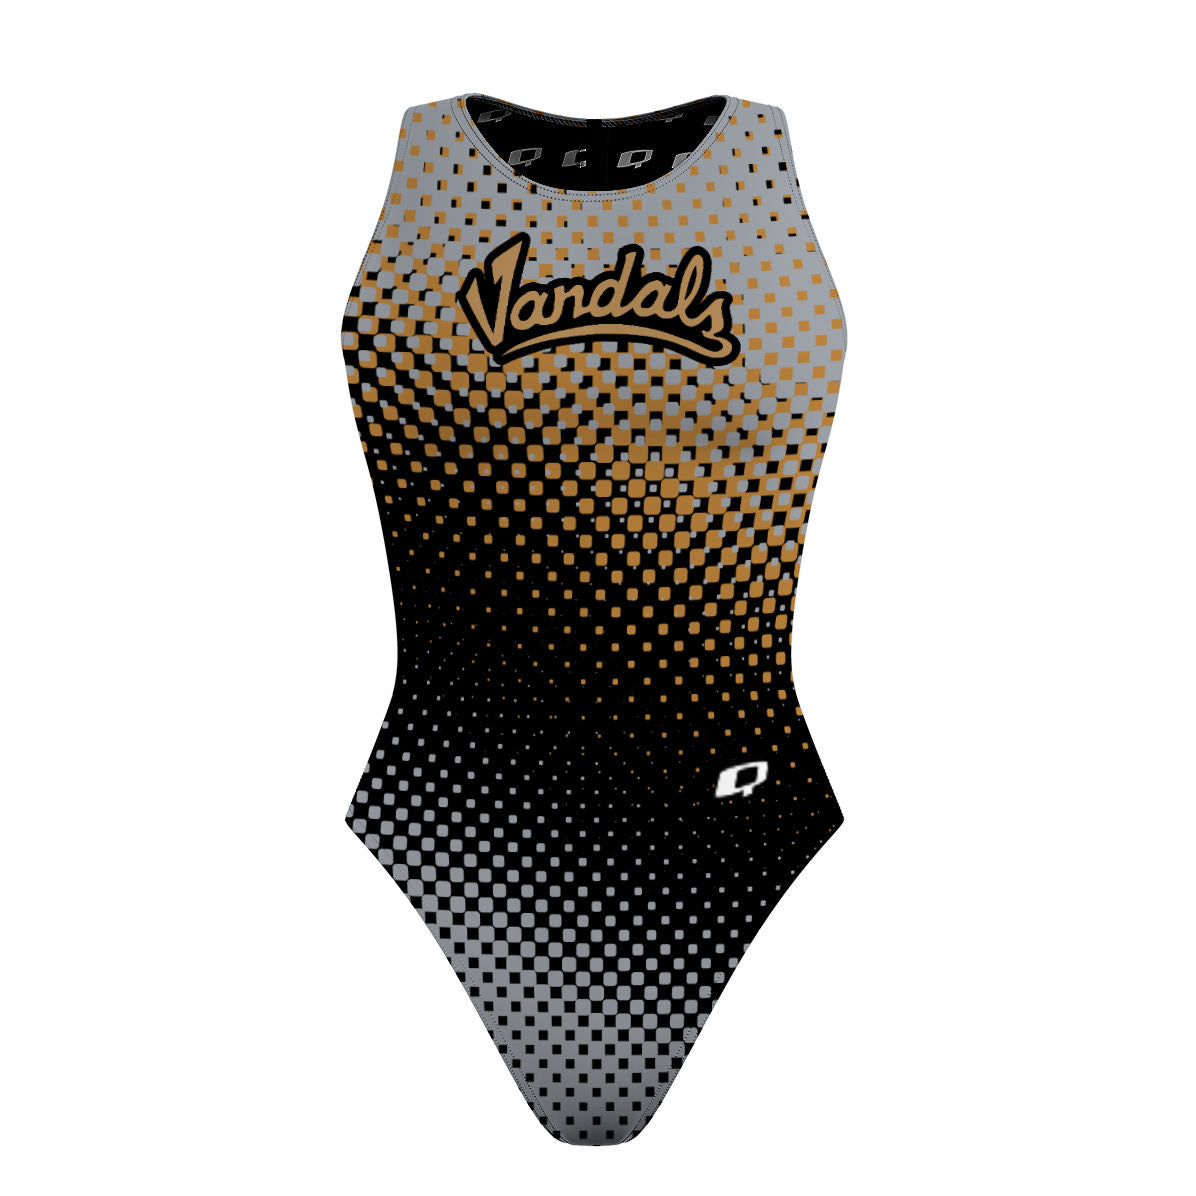 Vandals 23 V3 - Women's Waterpolo Swimsuit Classic Cut